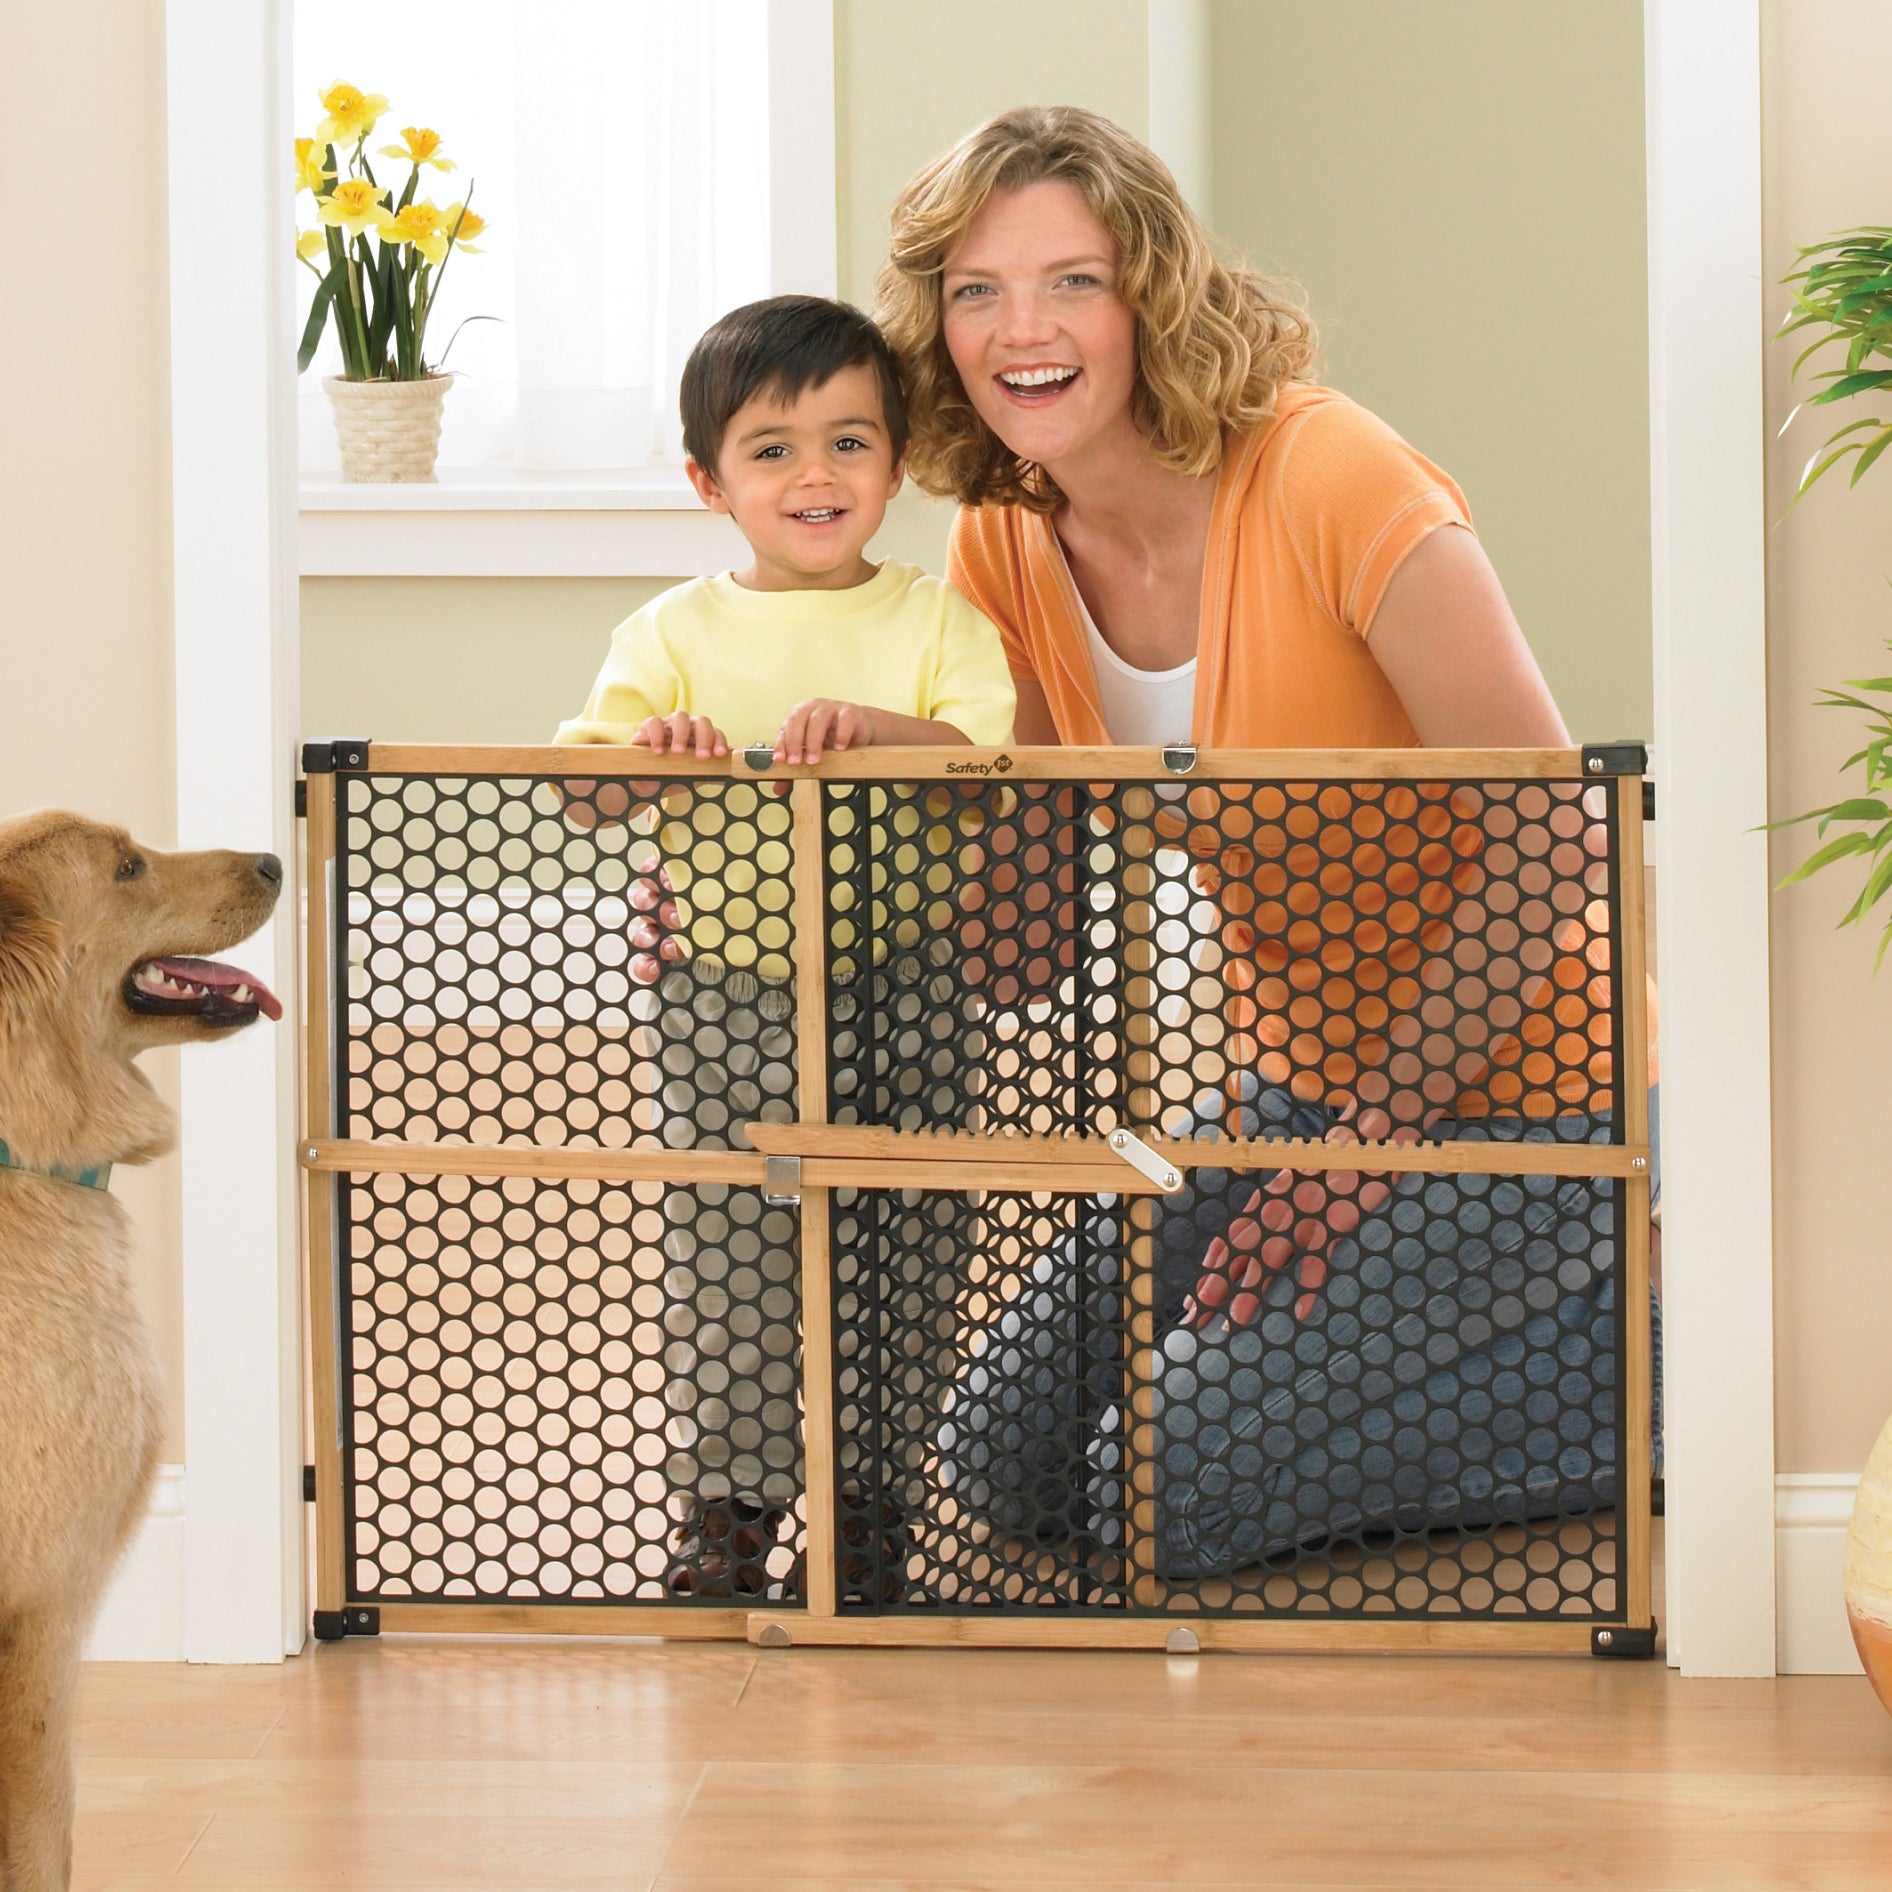 Toddler and mom behind a gate between them and the family dog